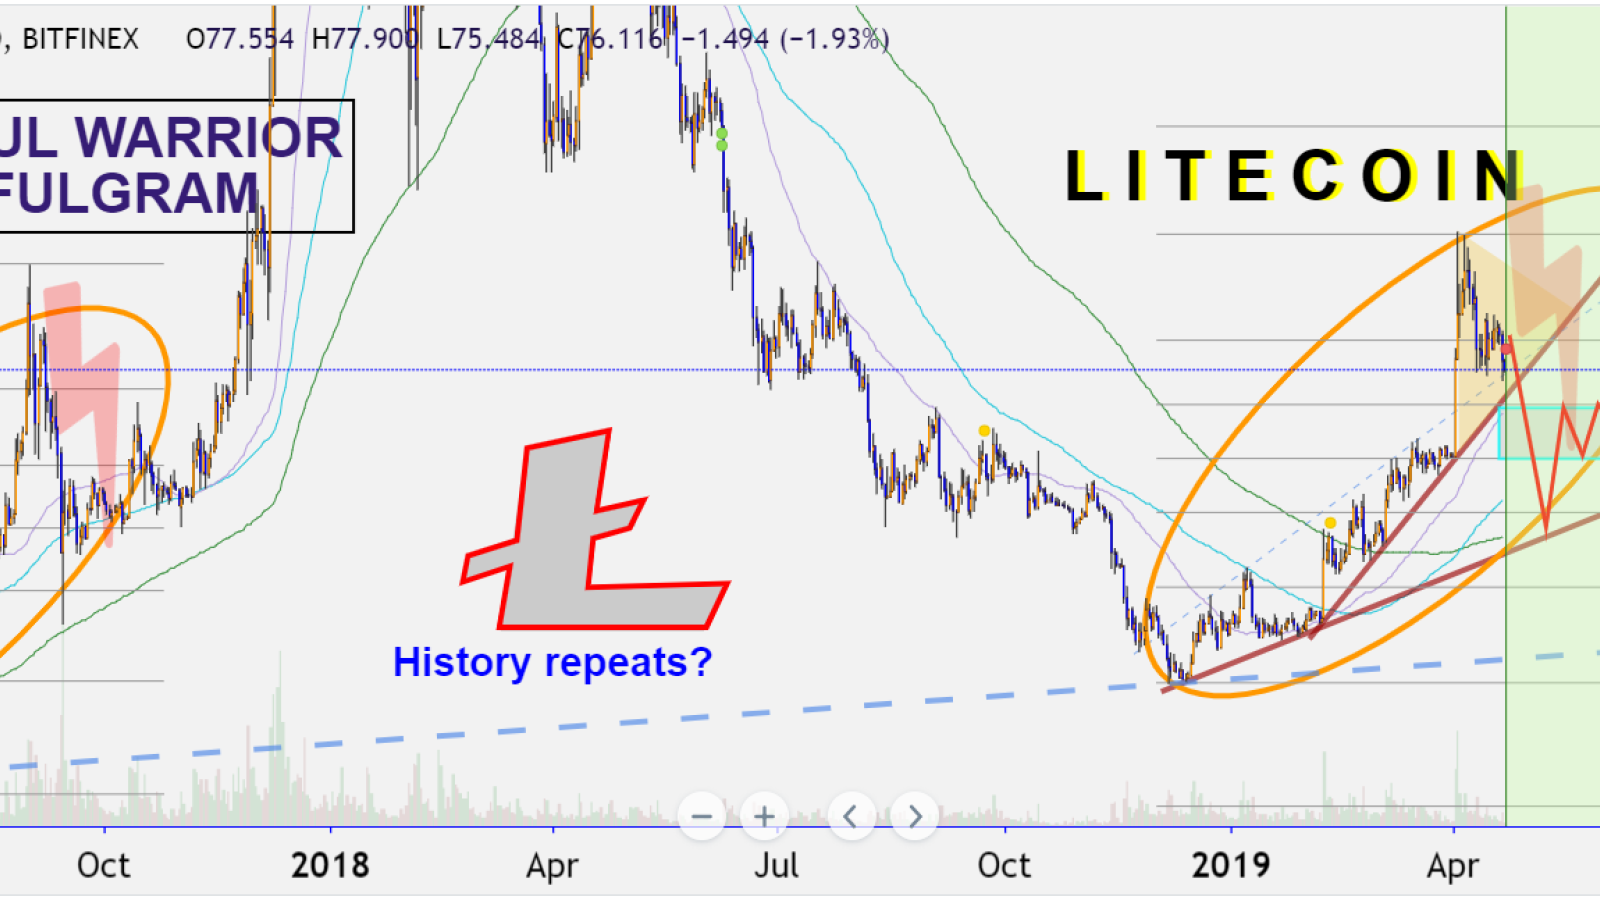  LTC might go through a recession before the next boom